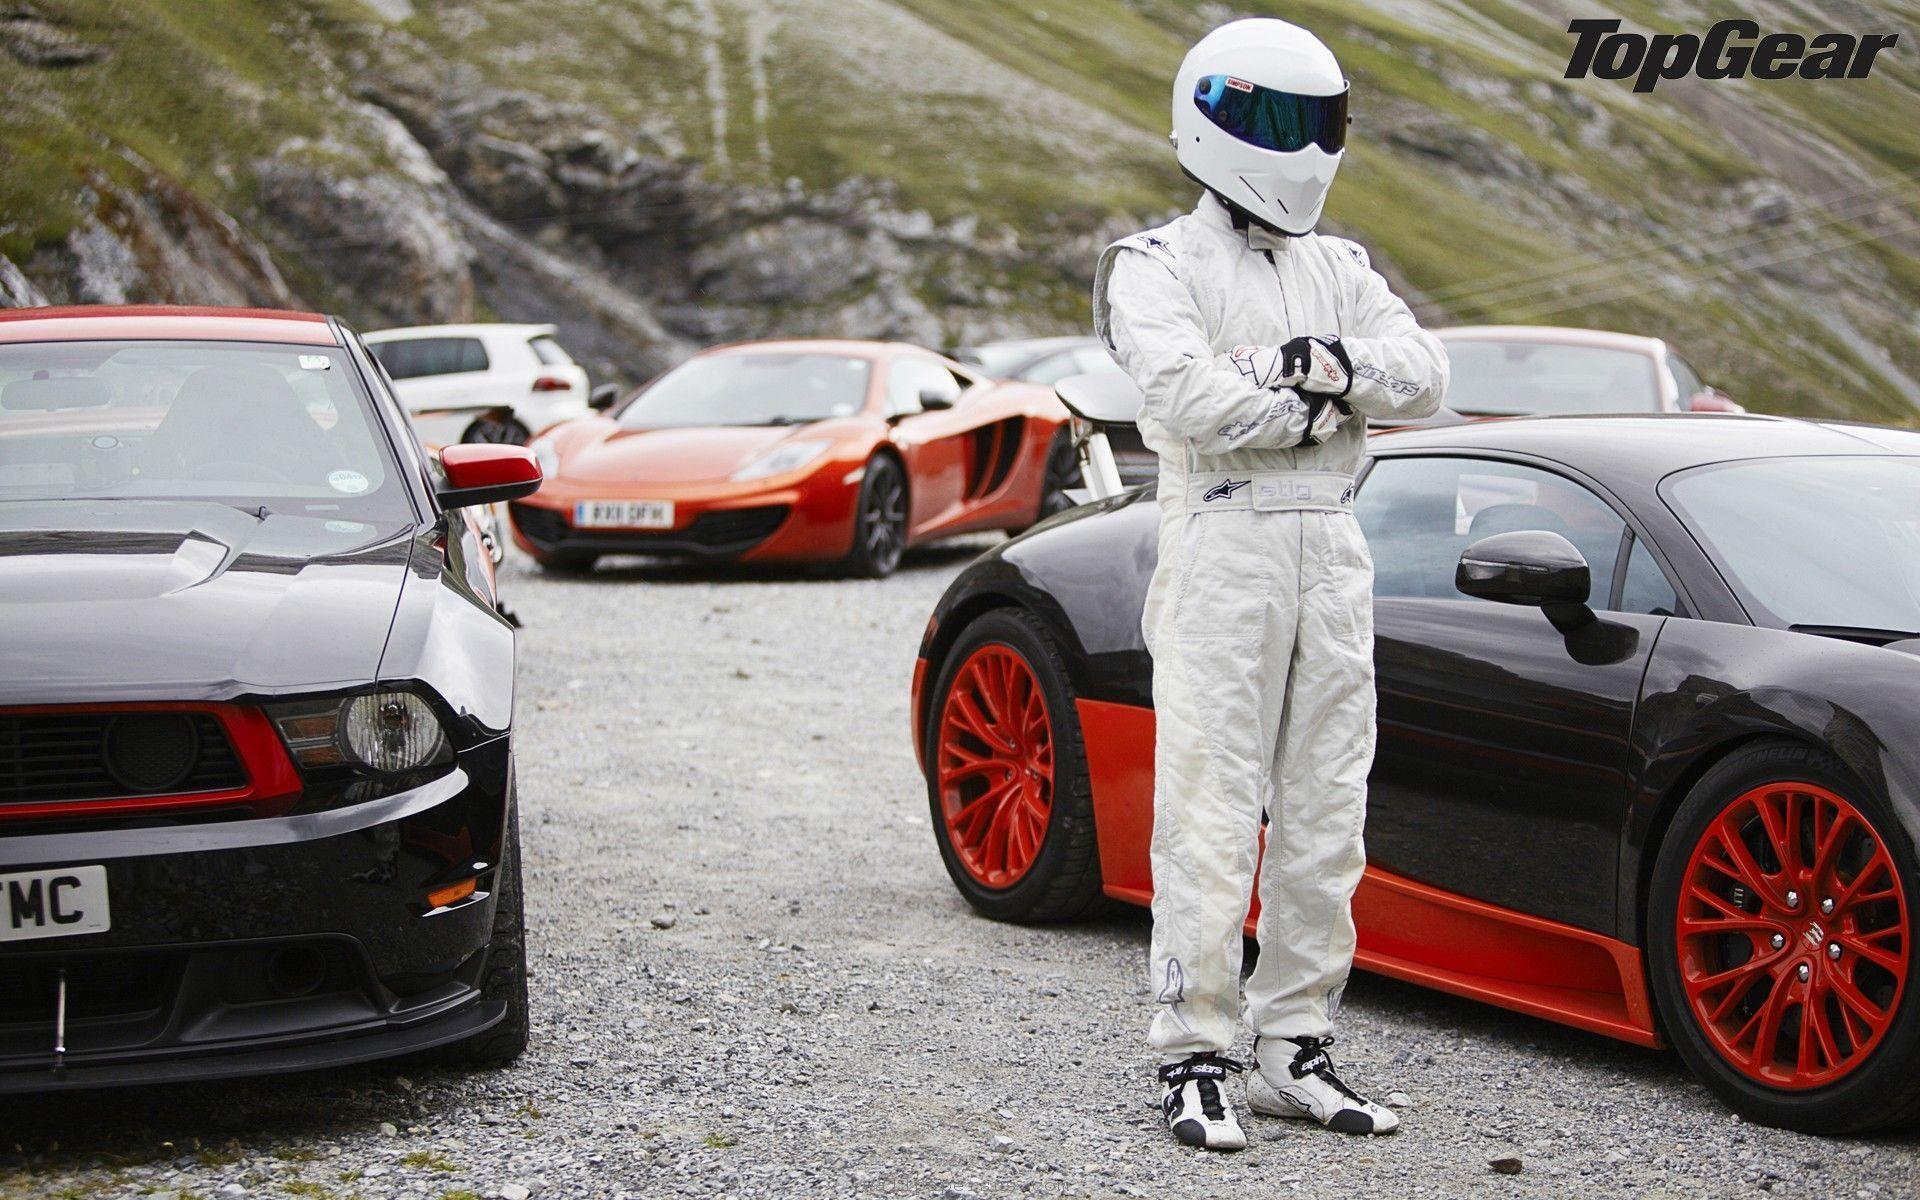 Awesome The Stig wallpaper. The Stig wallpaper